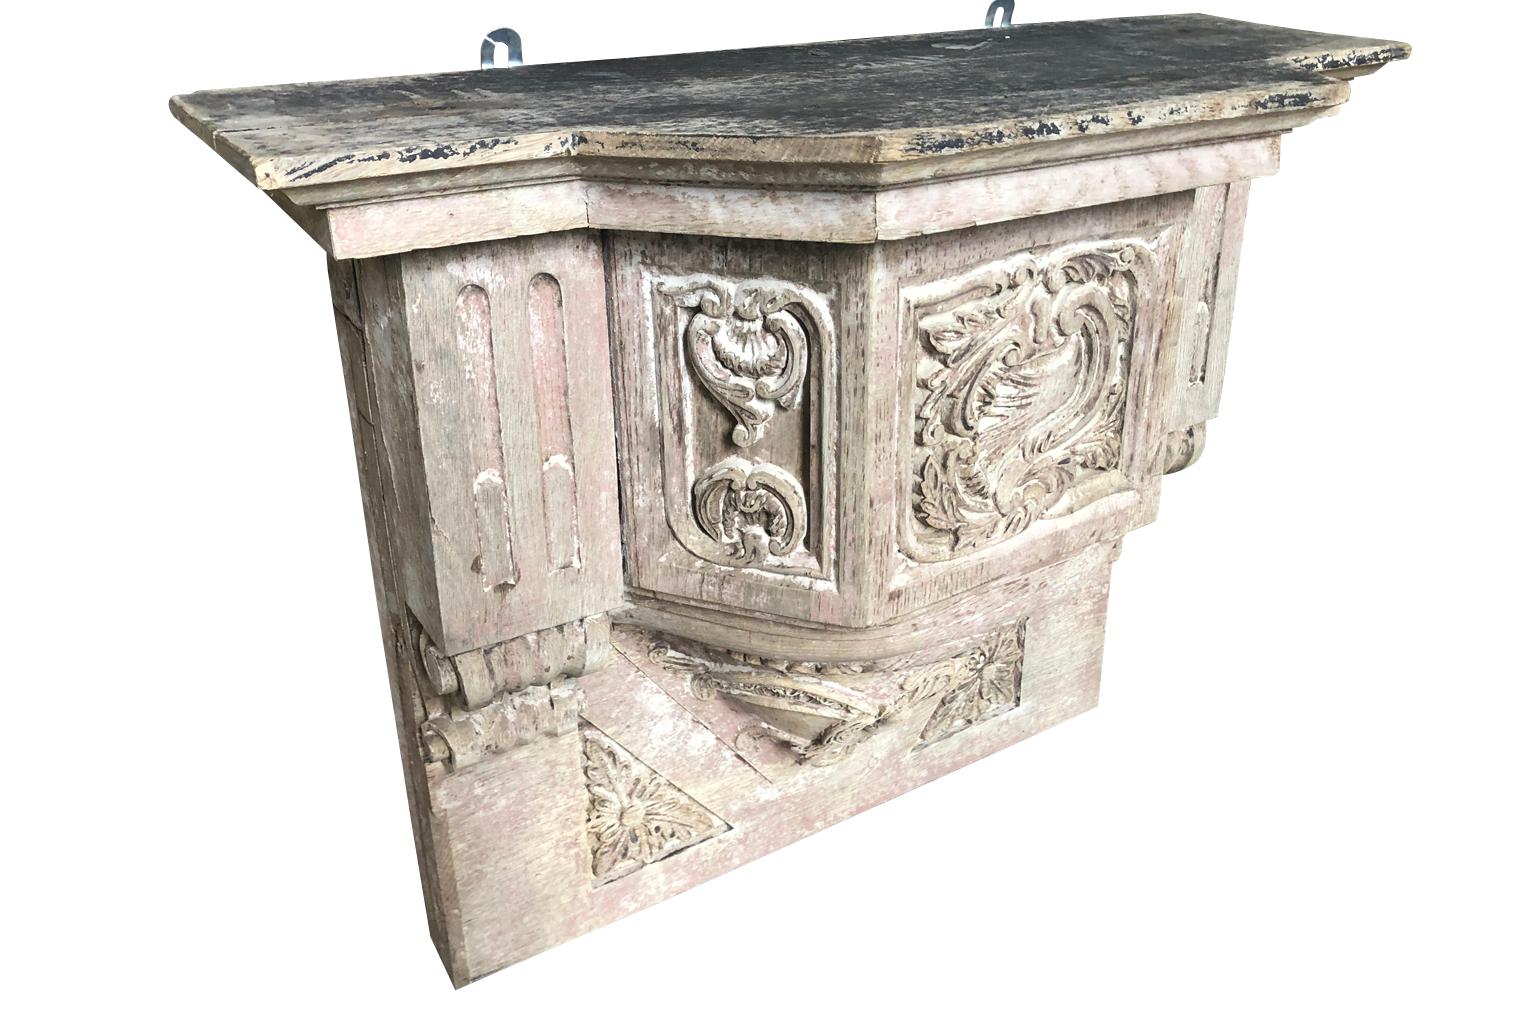 A stunning 18th century French wall suspended console. Beautifully crafted from oak with wonderful carving detail. Consoles such as this one were originally used for the display of statuary.